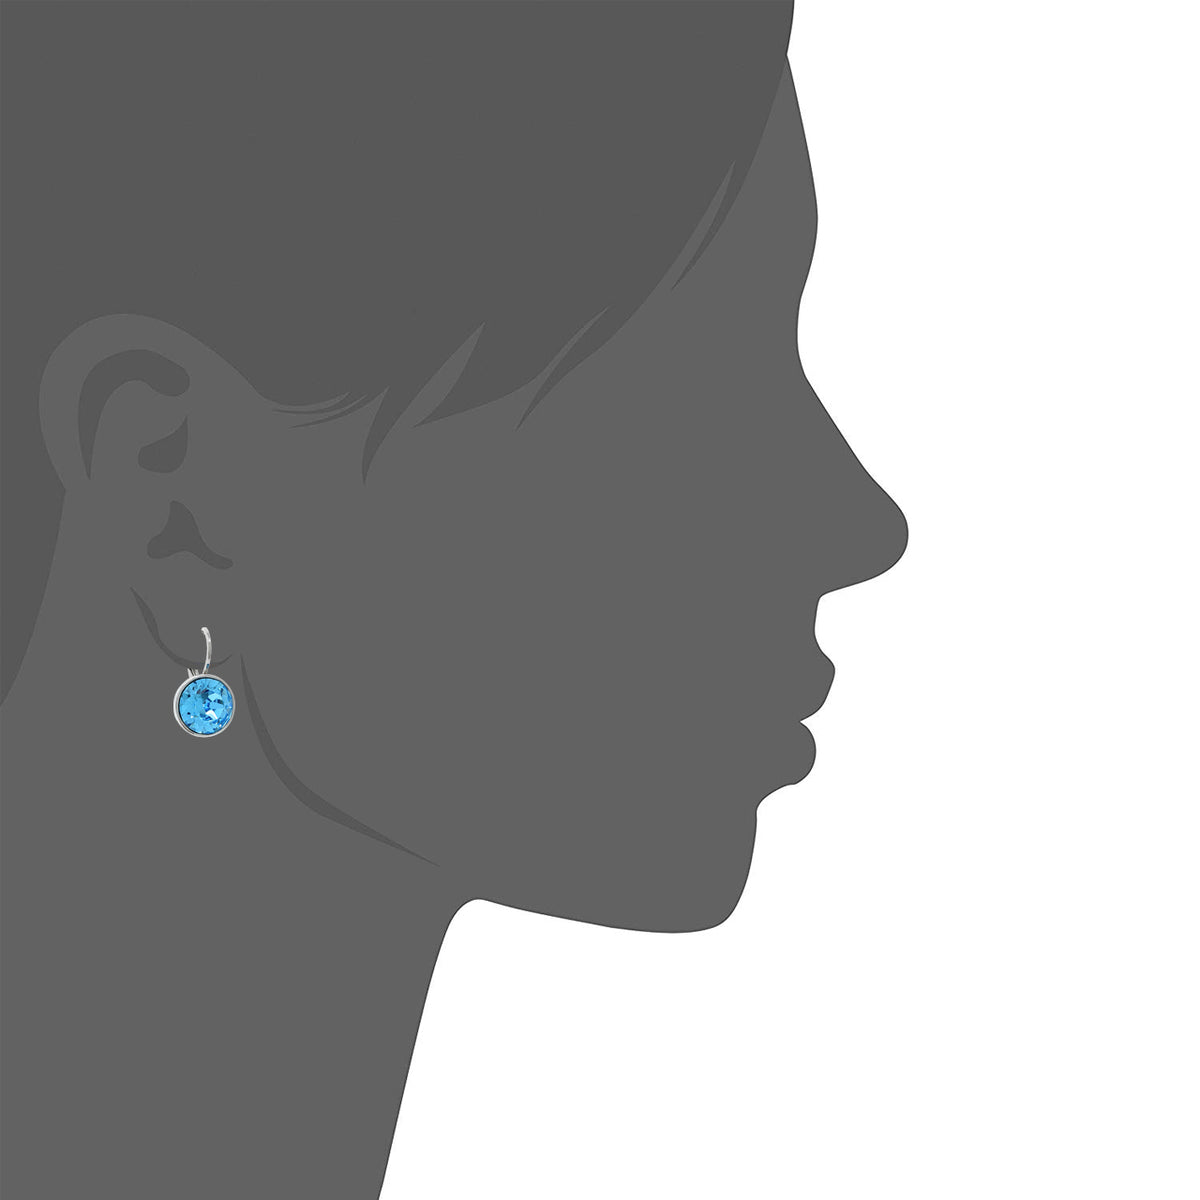 Drop Earrings with Blue Aquamarine Crystals Rhodium Plated